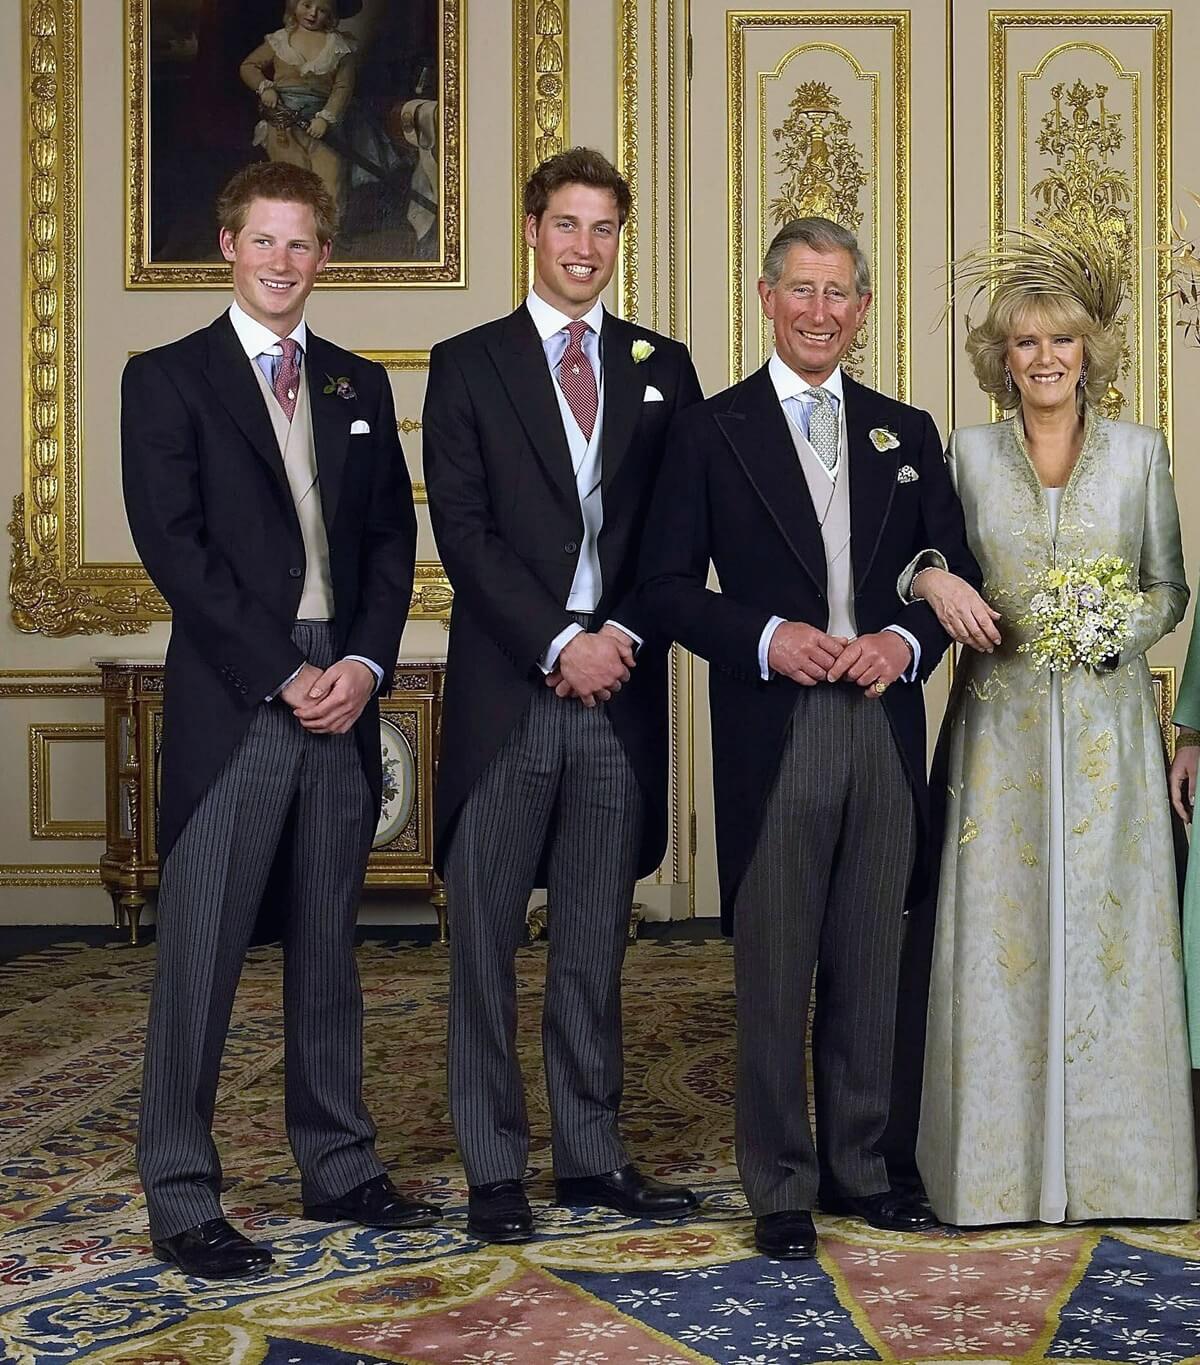 Then-Prince Charles and Camilla Parker Bowles pose for a wedding photo with Prince William and Prince Harry